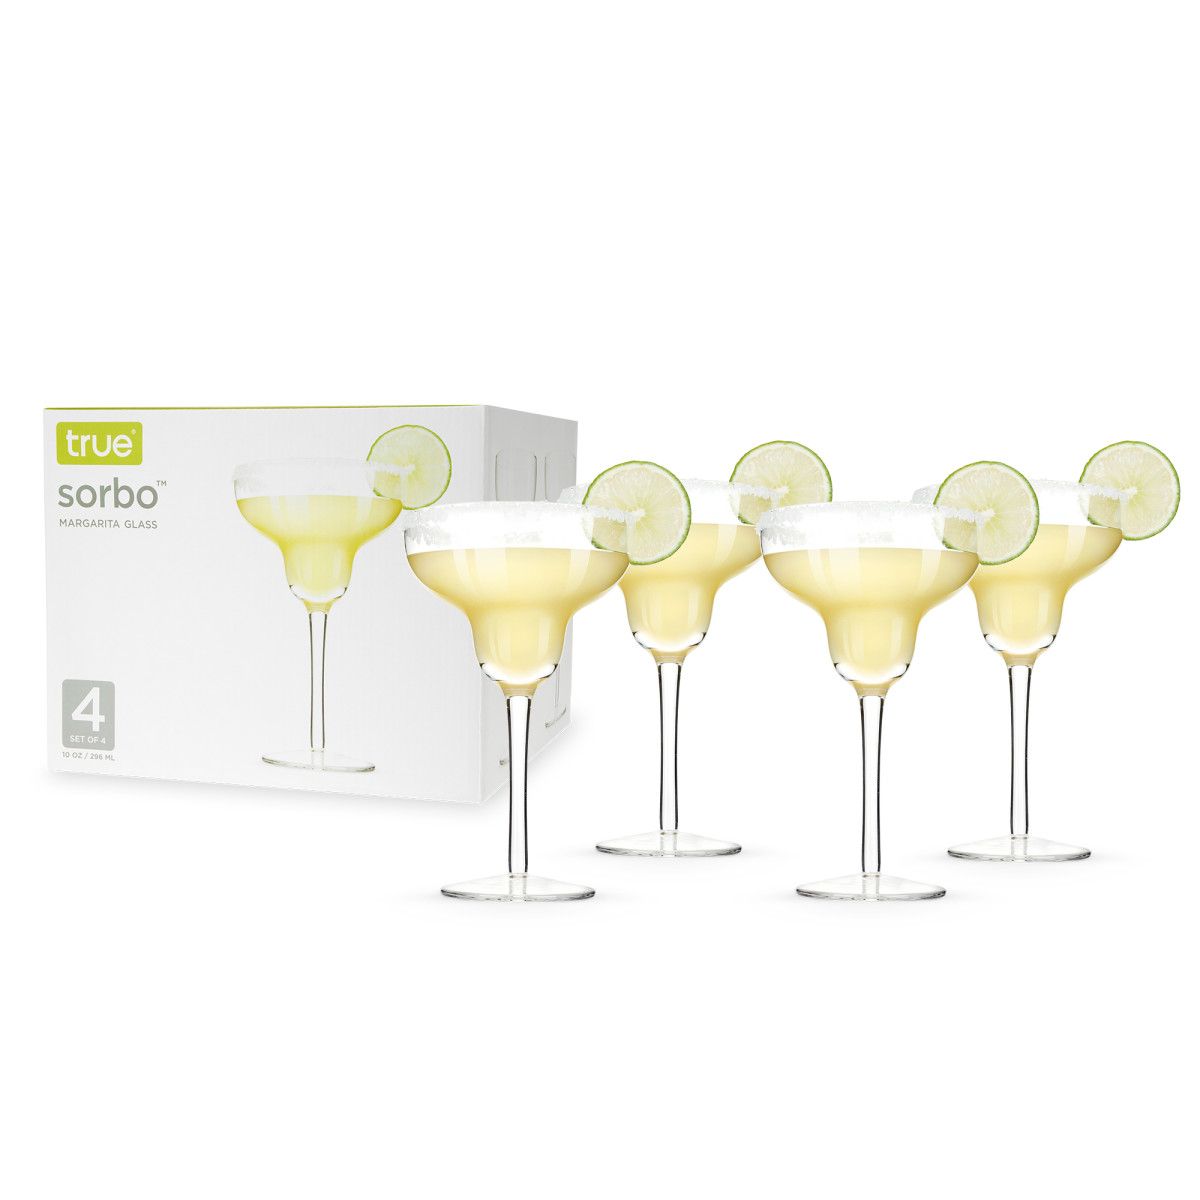 Double Wall Classic Margarita Glasses, Unique Shaped Insulated